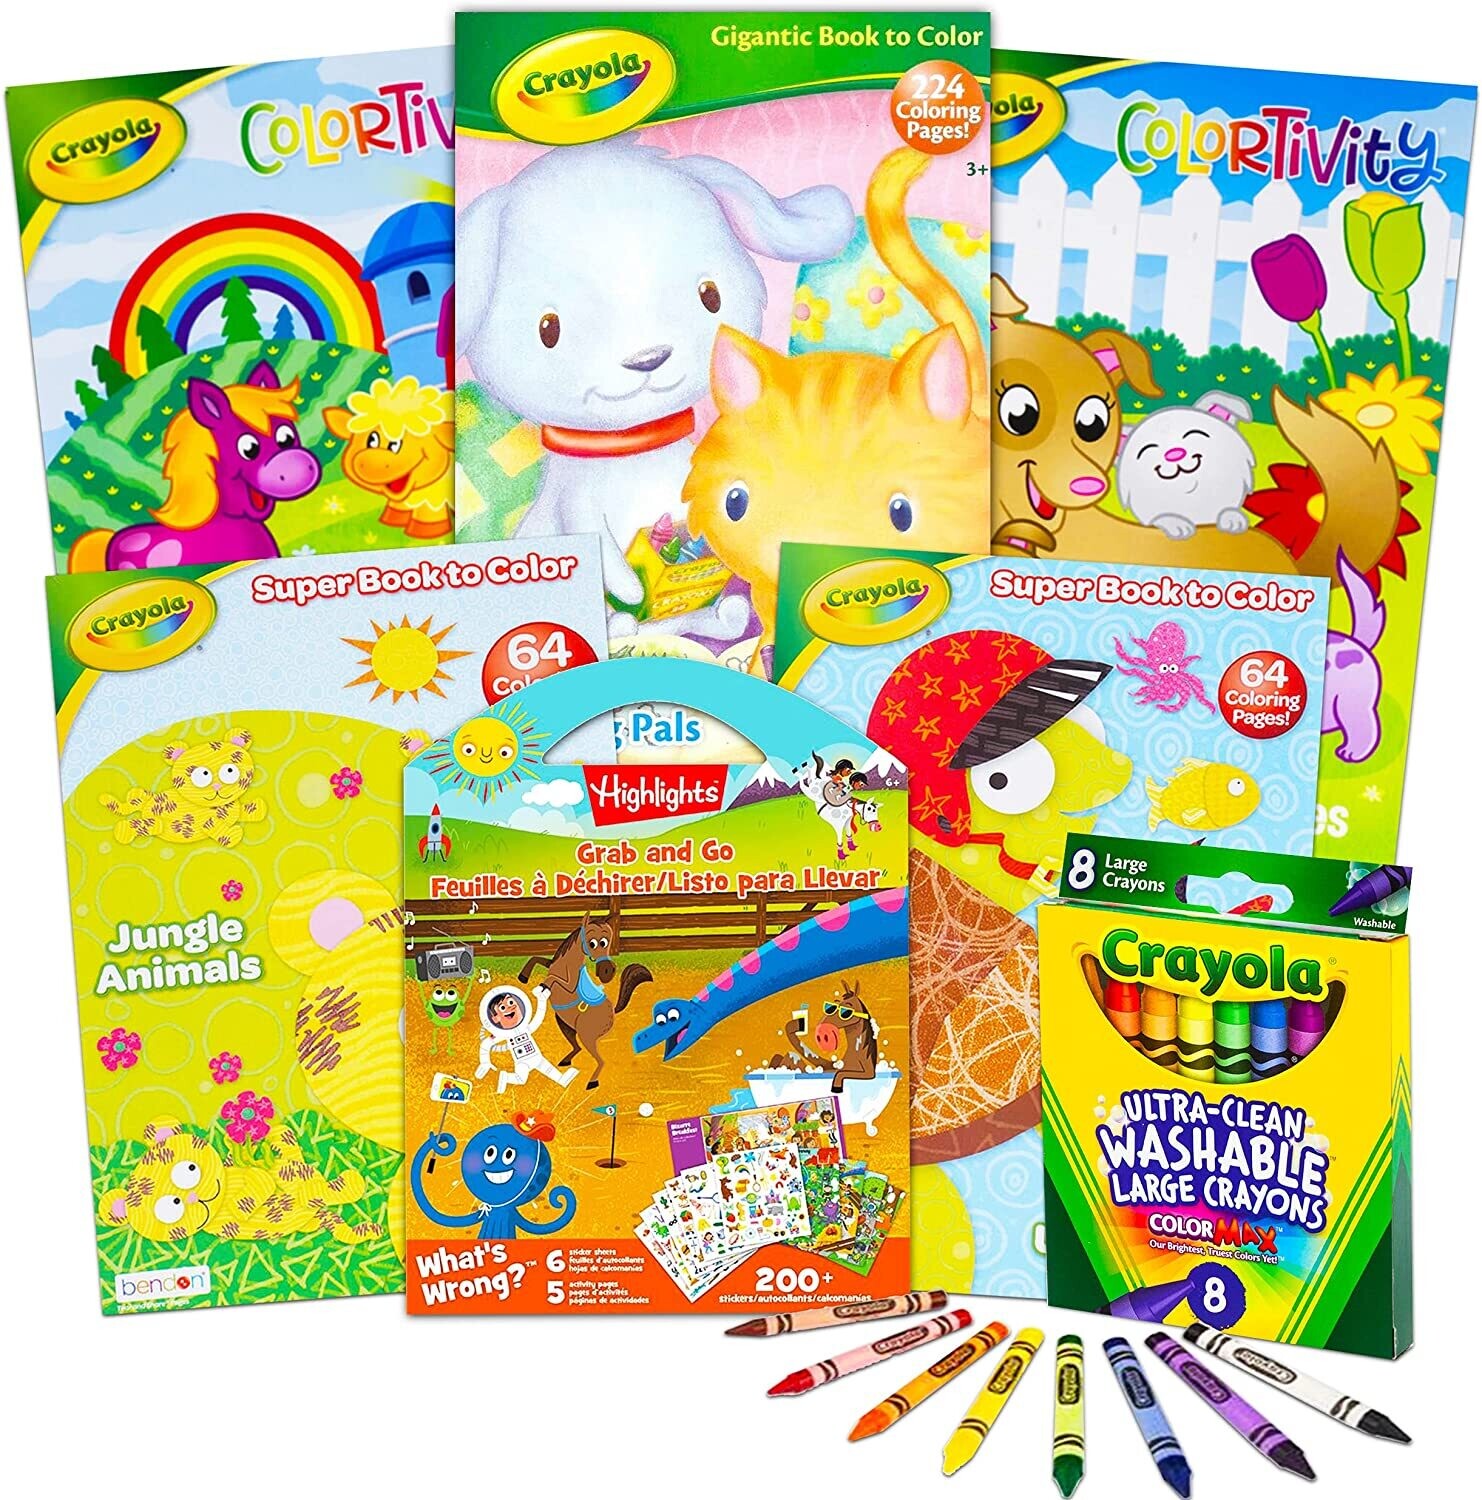 Crayola Coloring Books for Kids - 13 piece set